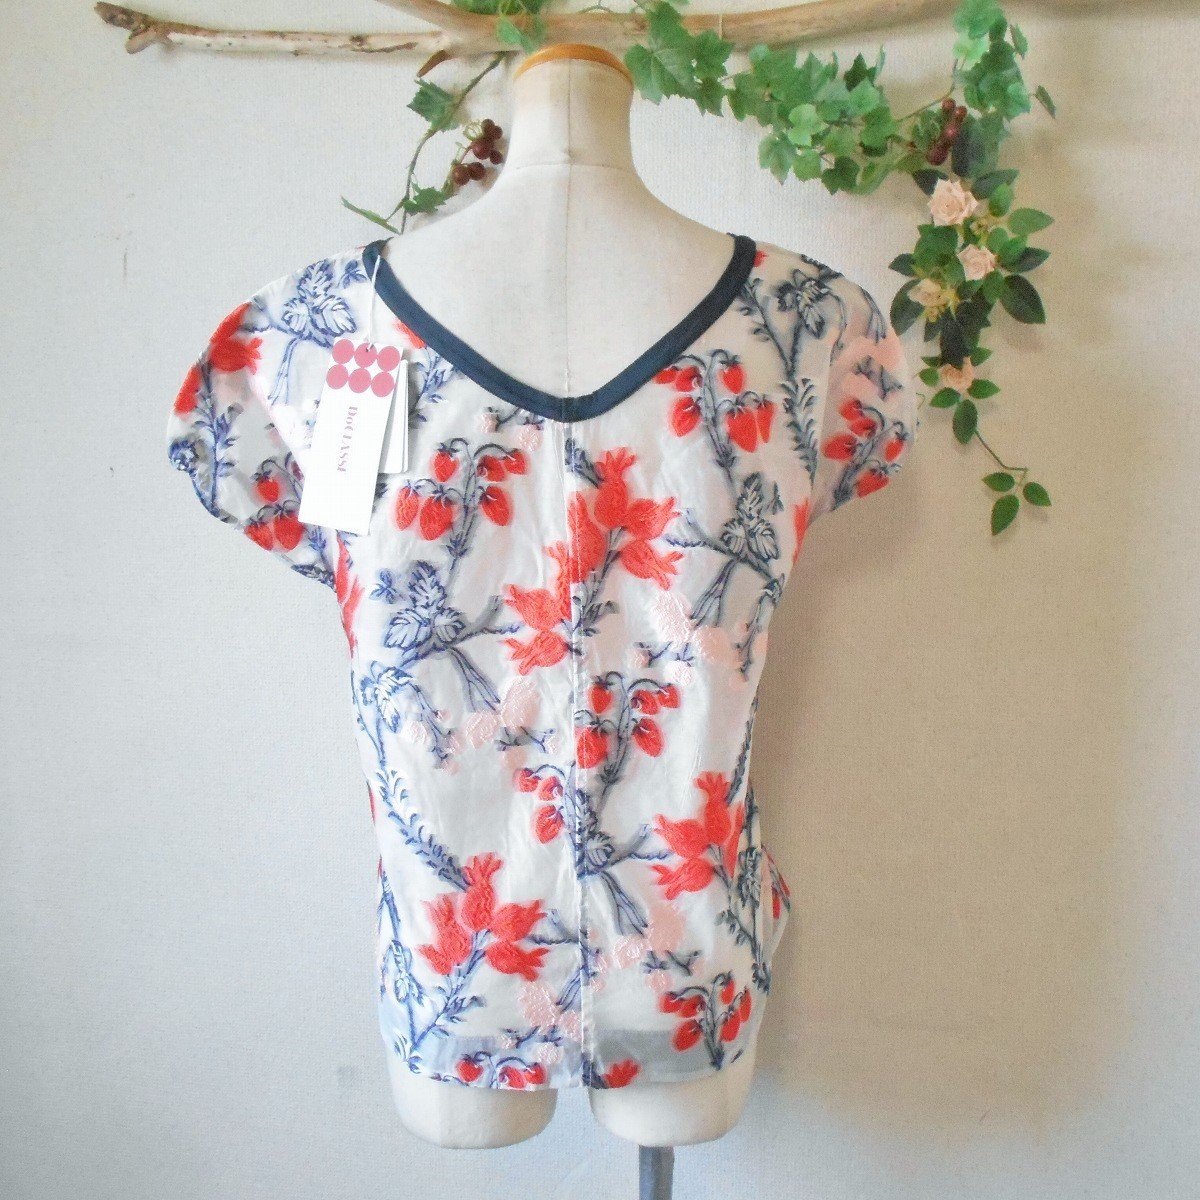  tag equipped 9990 jpy duklaseDoCLASSE summer embroidery entering see-through blouse 13